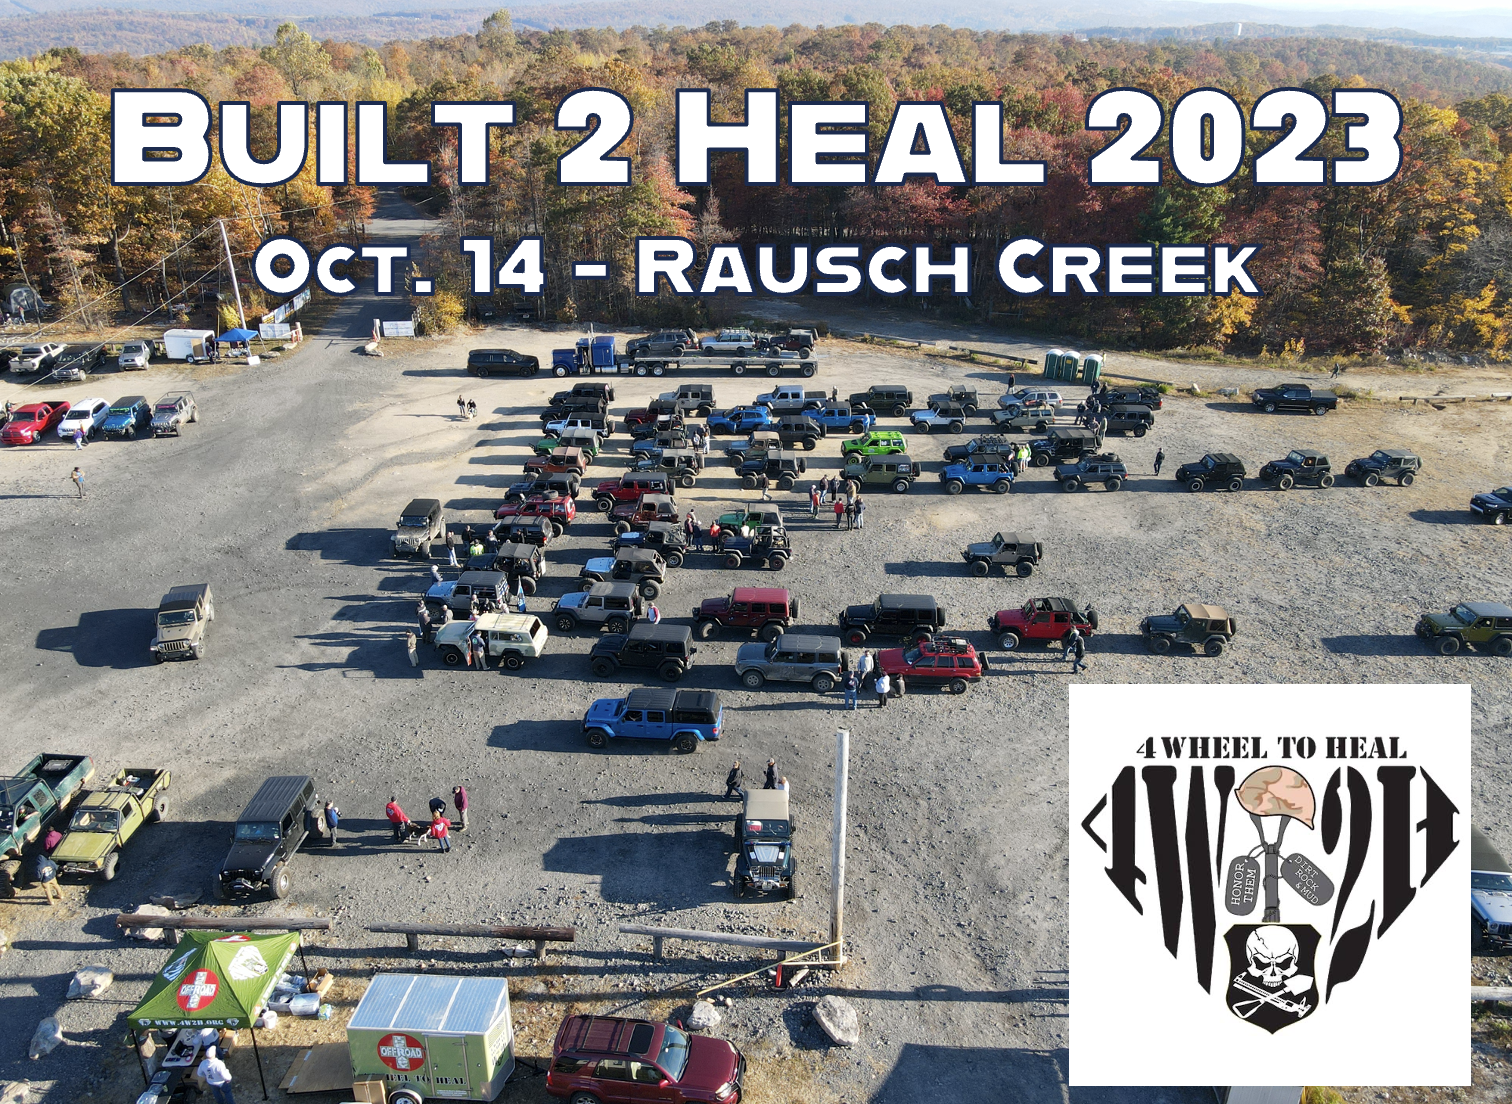 Built 2 Heal event promo image - arial shot of the parking area for trail ride lineup in 2022